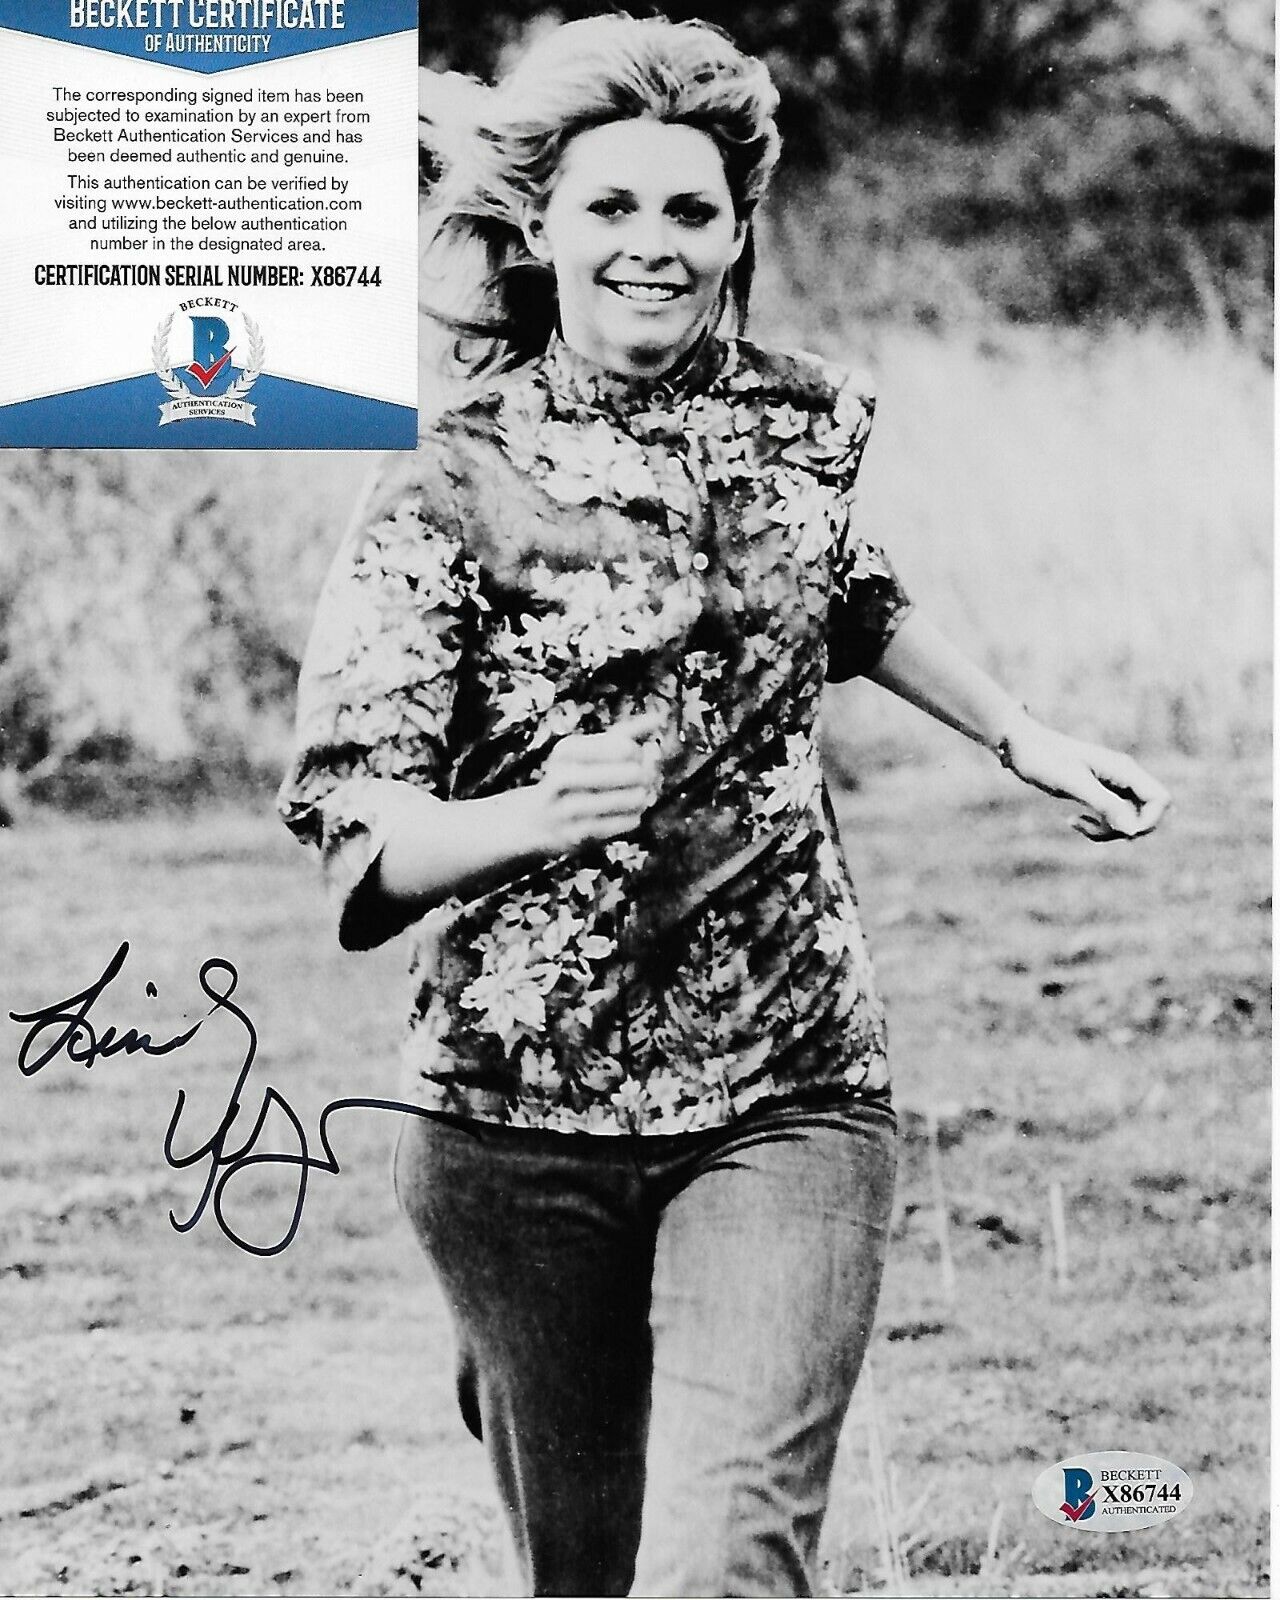 Lindsay Wagner Bionic Woman Original Autographed 8X10 Photo Poster painting w/Beckett COA #6